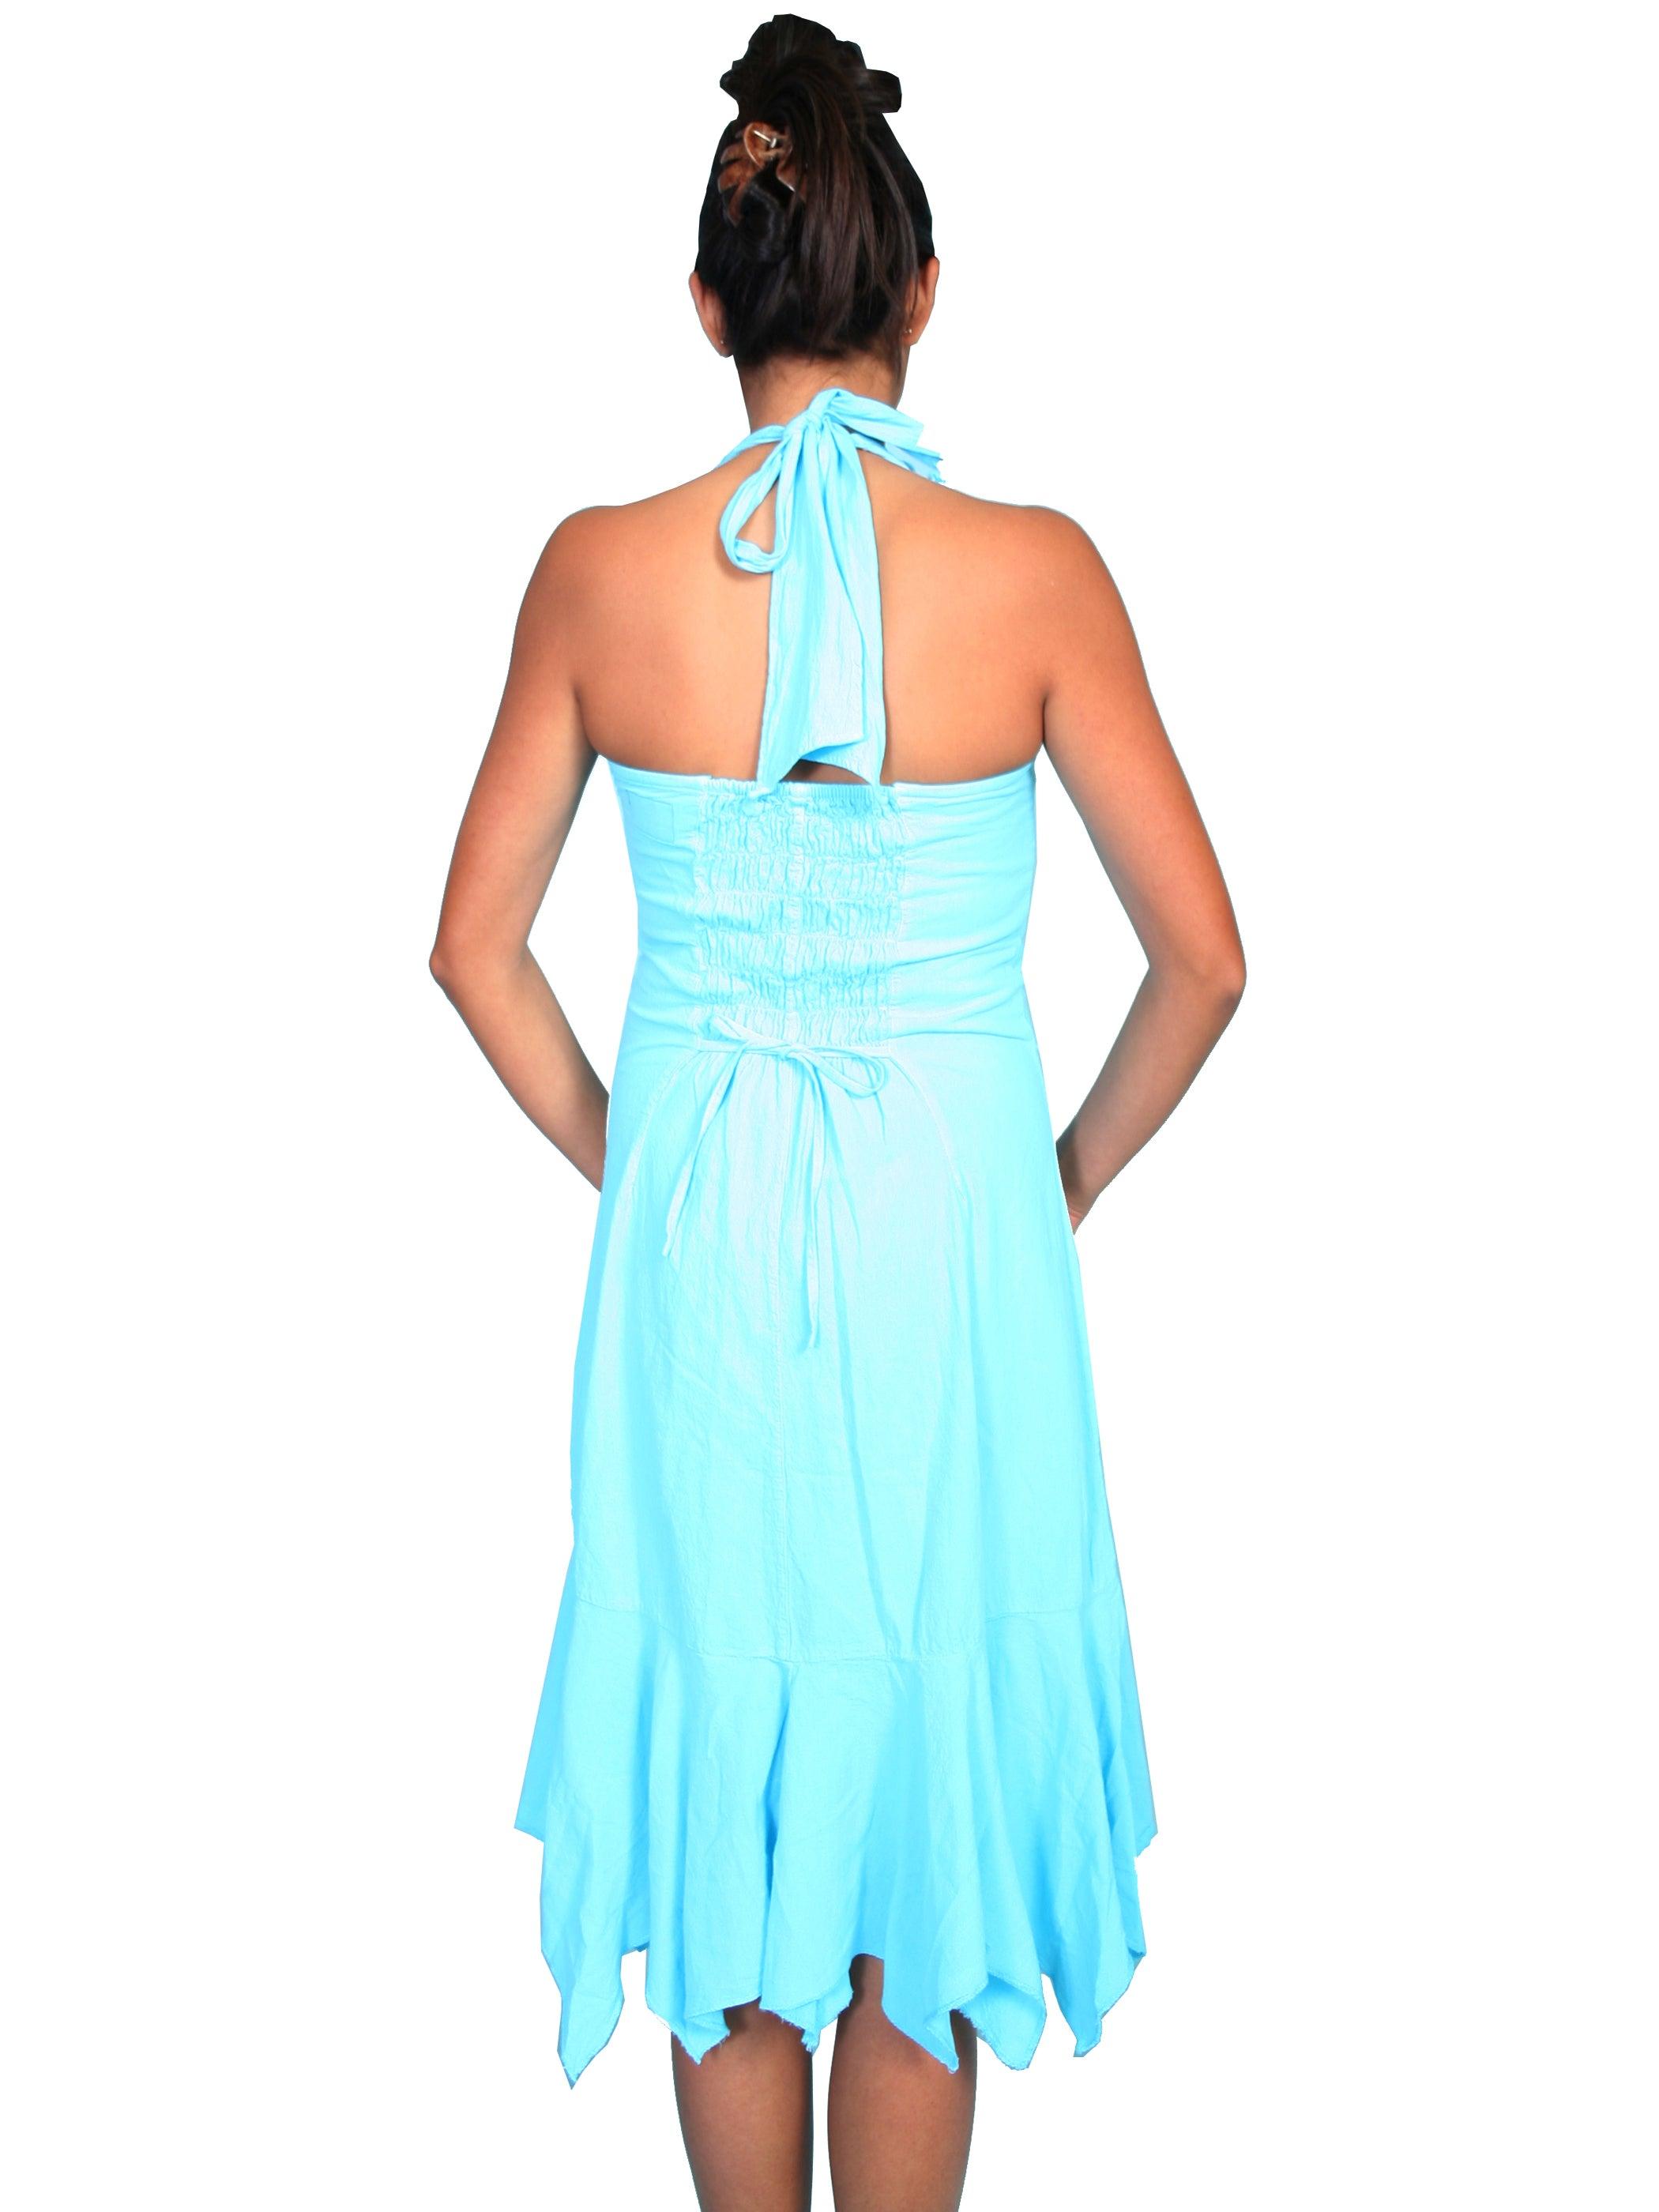 Scully TURQUOISE HALTER DRESS PERUVIAN COTTON - Flyclothing LLC